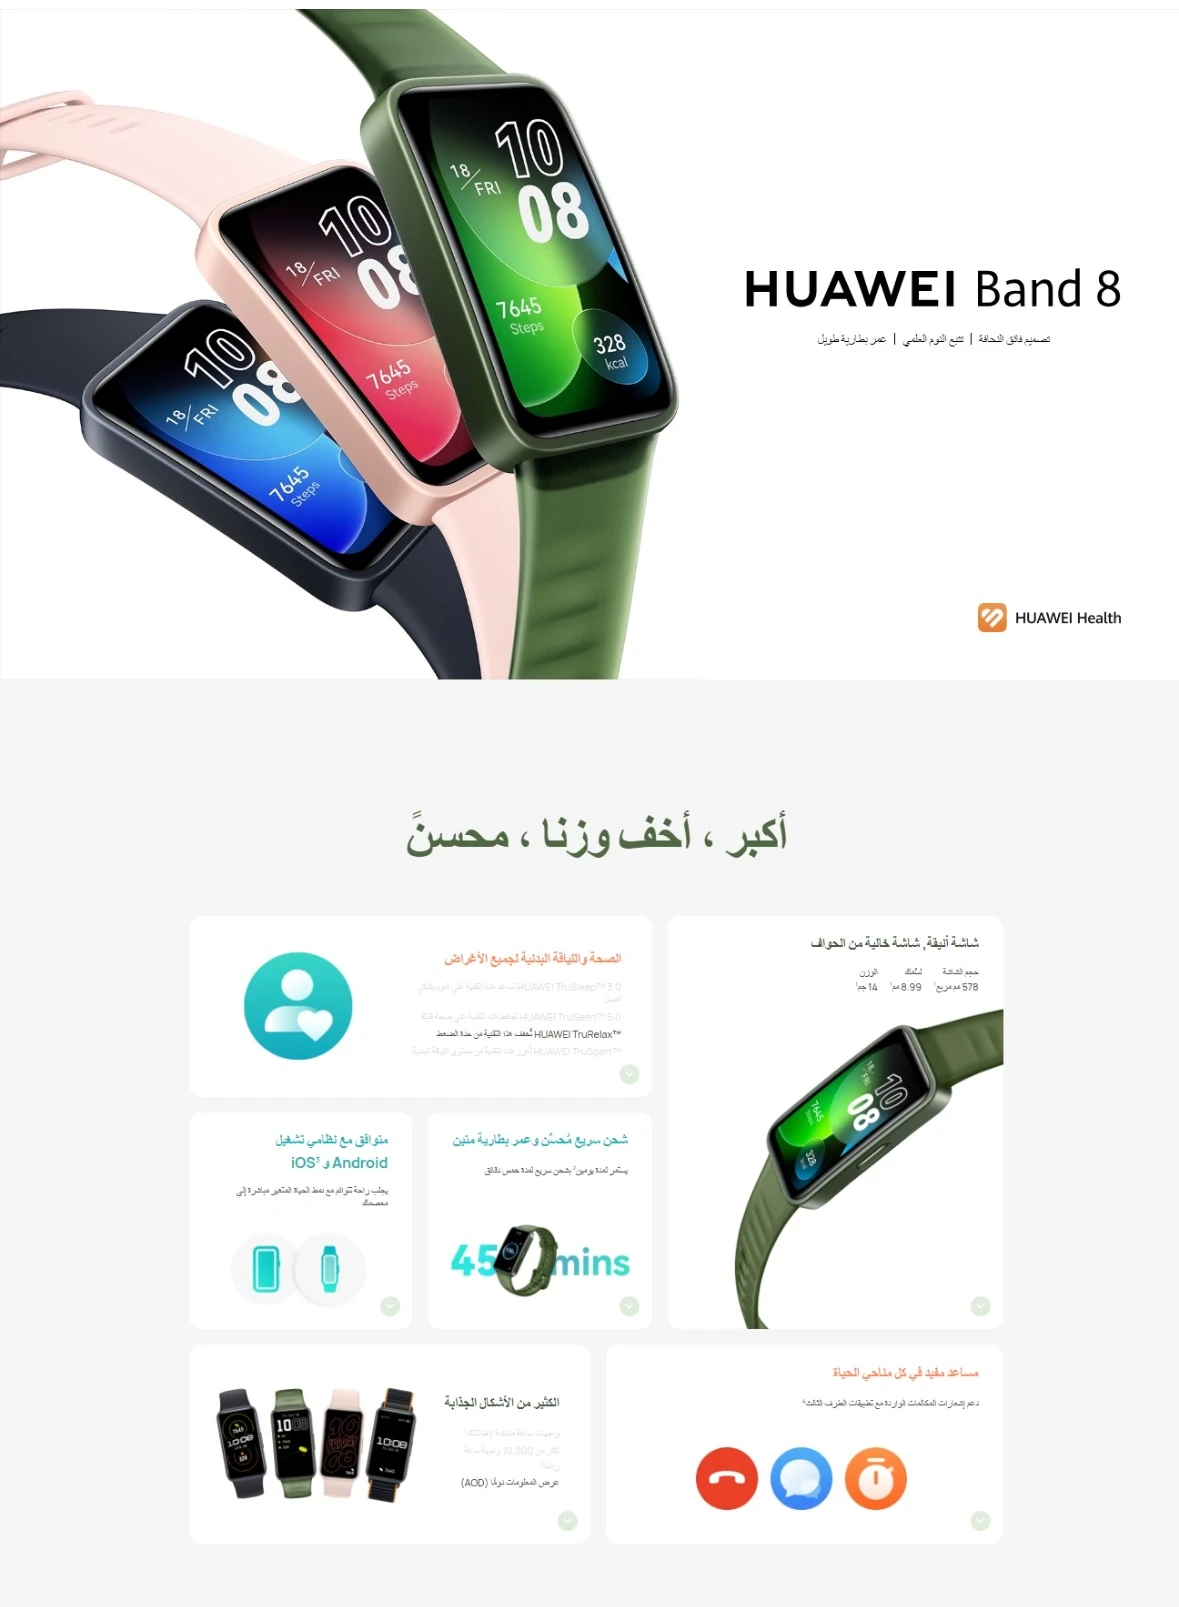 band8-features-arabic